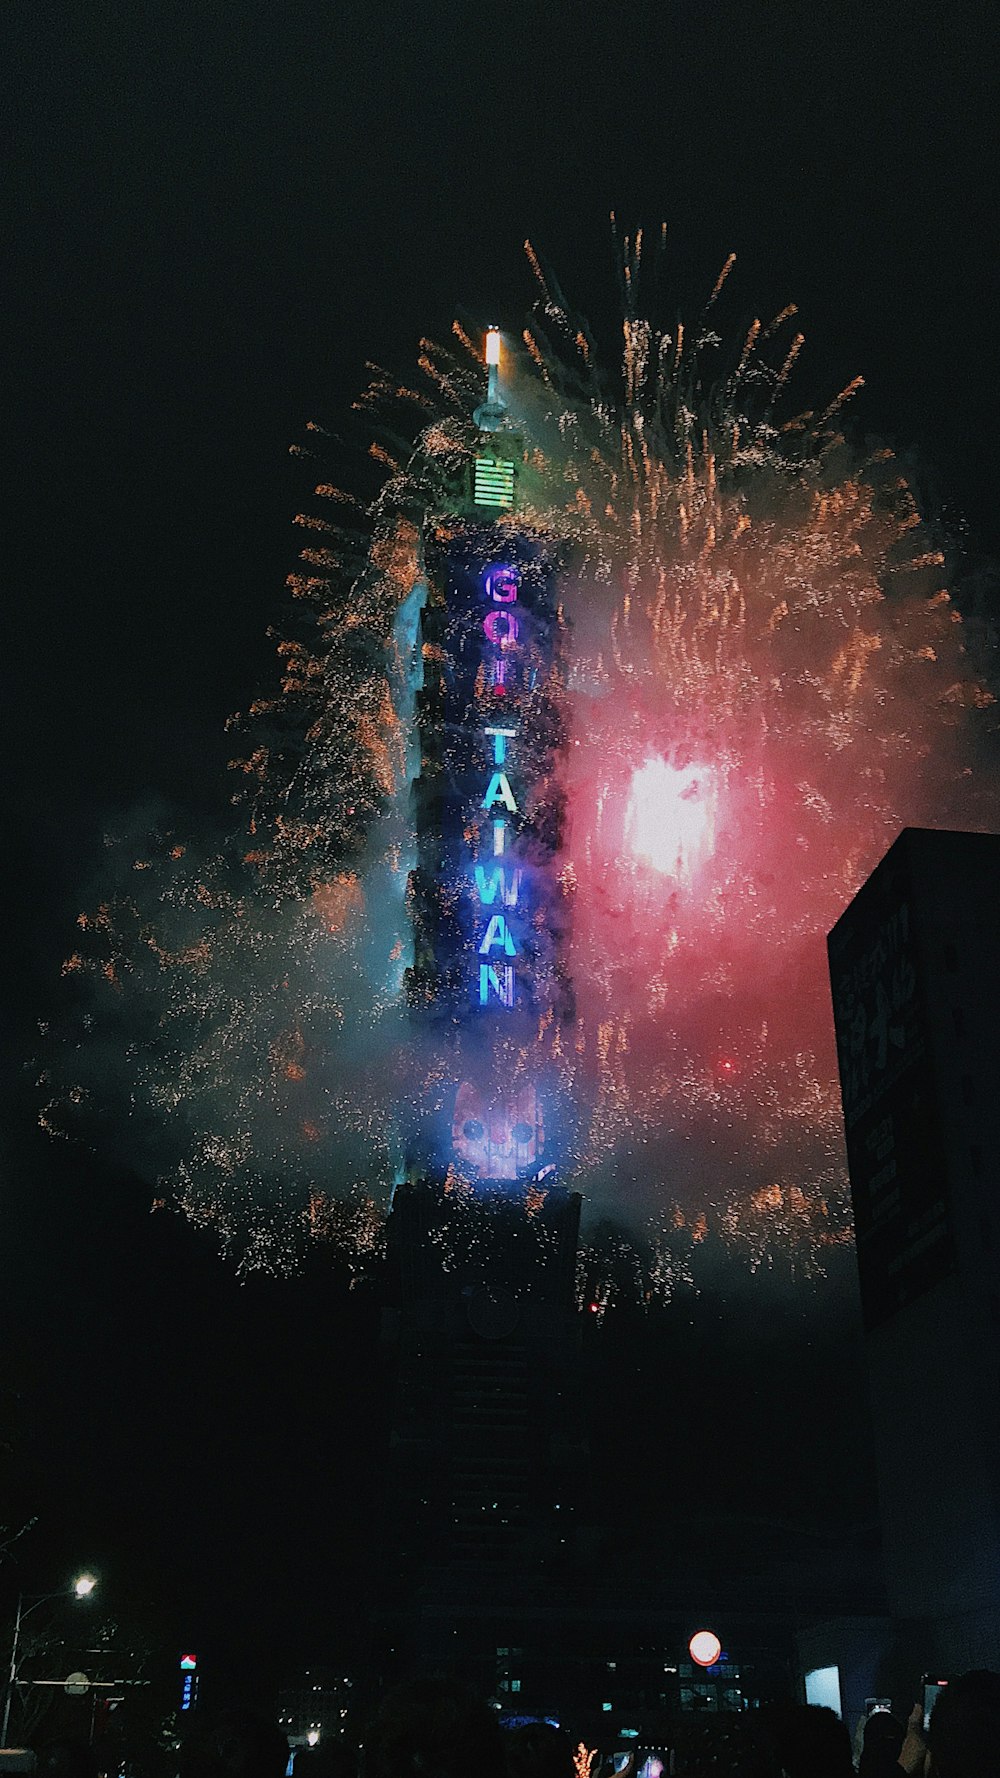 fireworks are lit up in the sky above a building